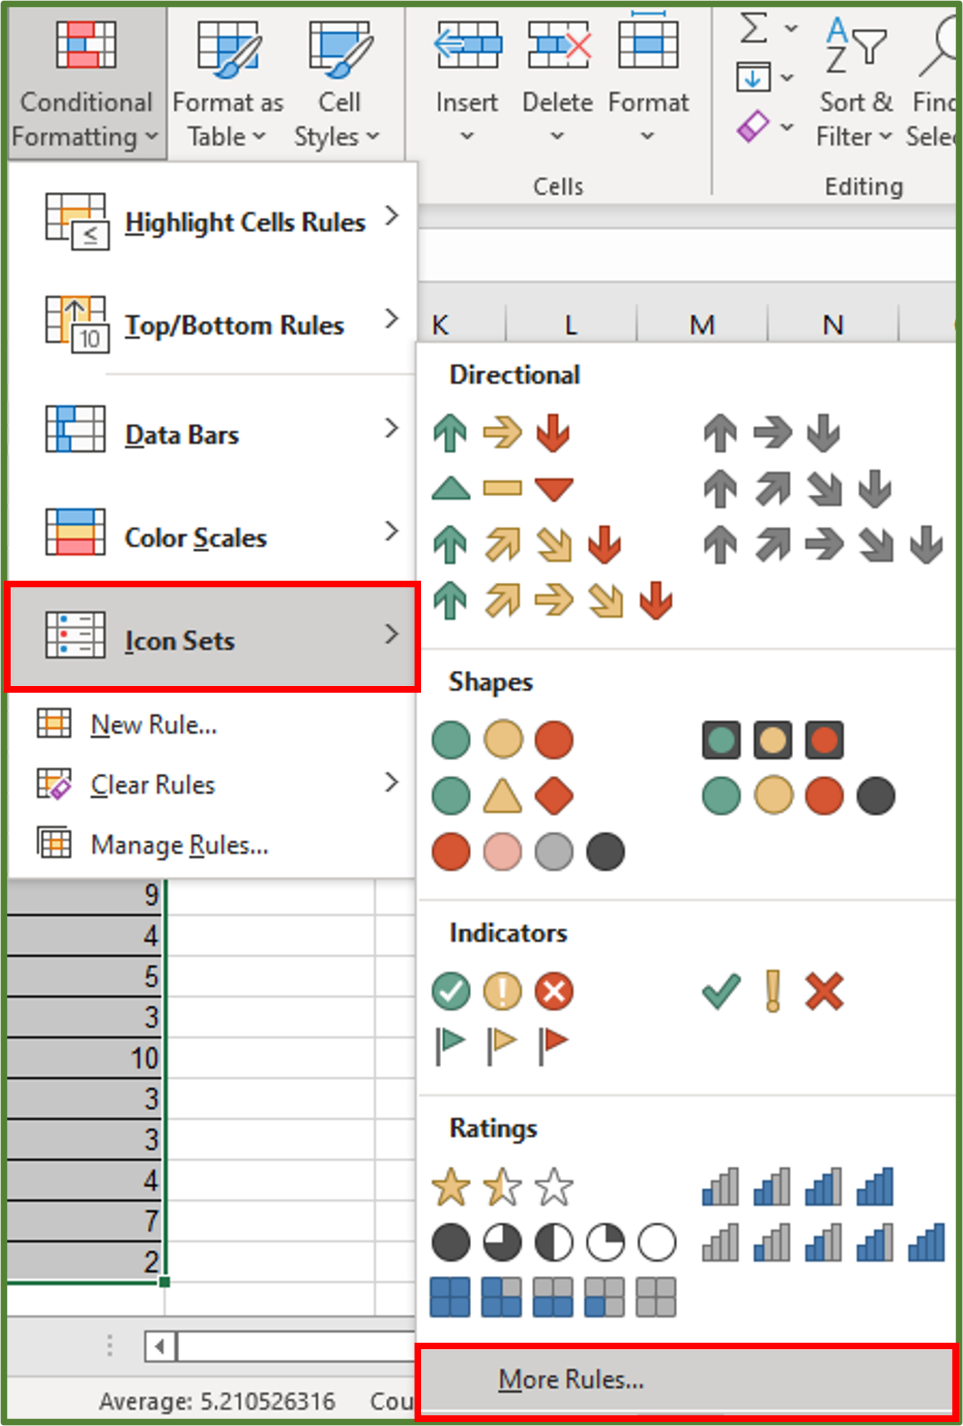 Screenshot showing Icon Sets and More Rules... highlighted.